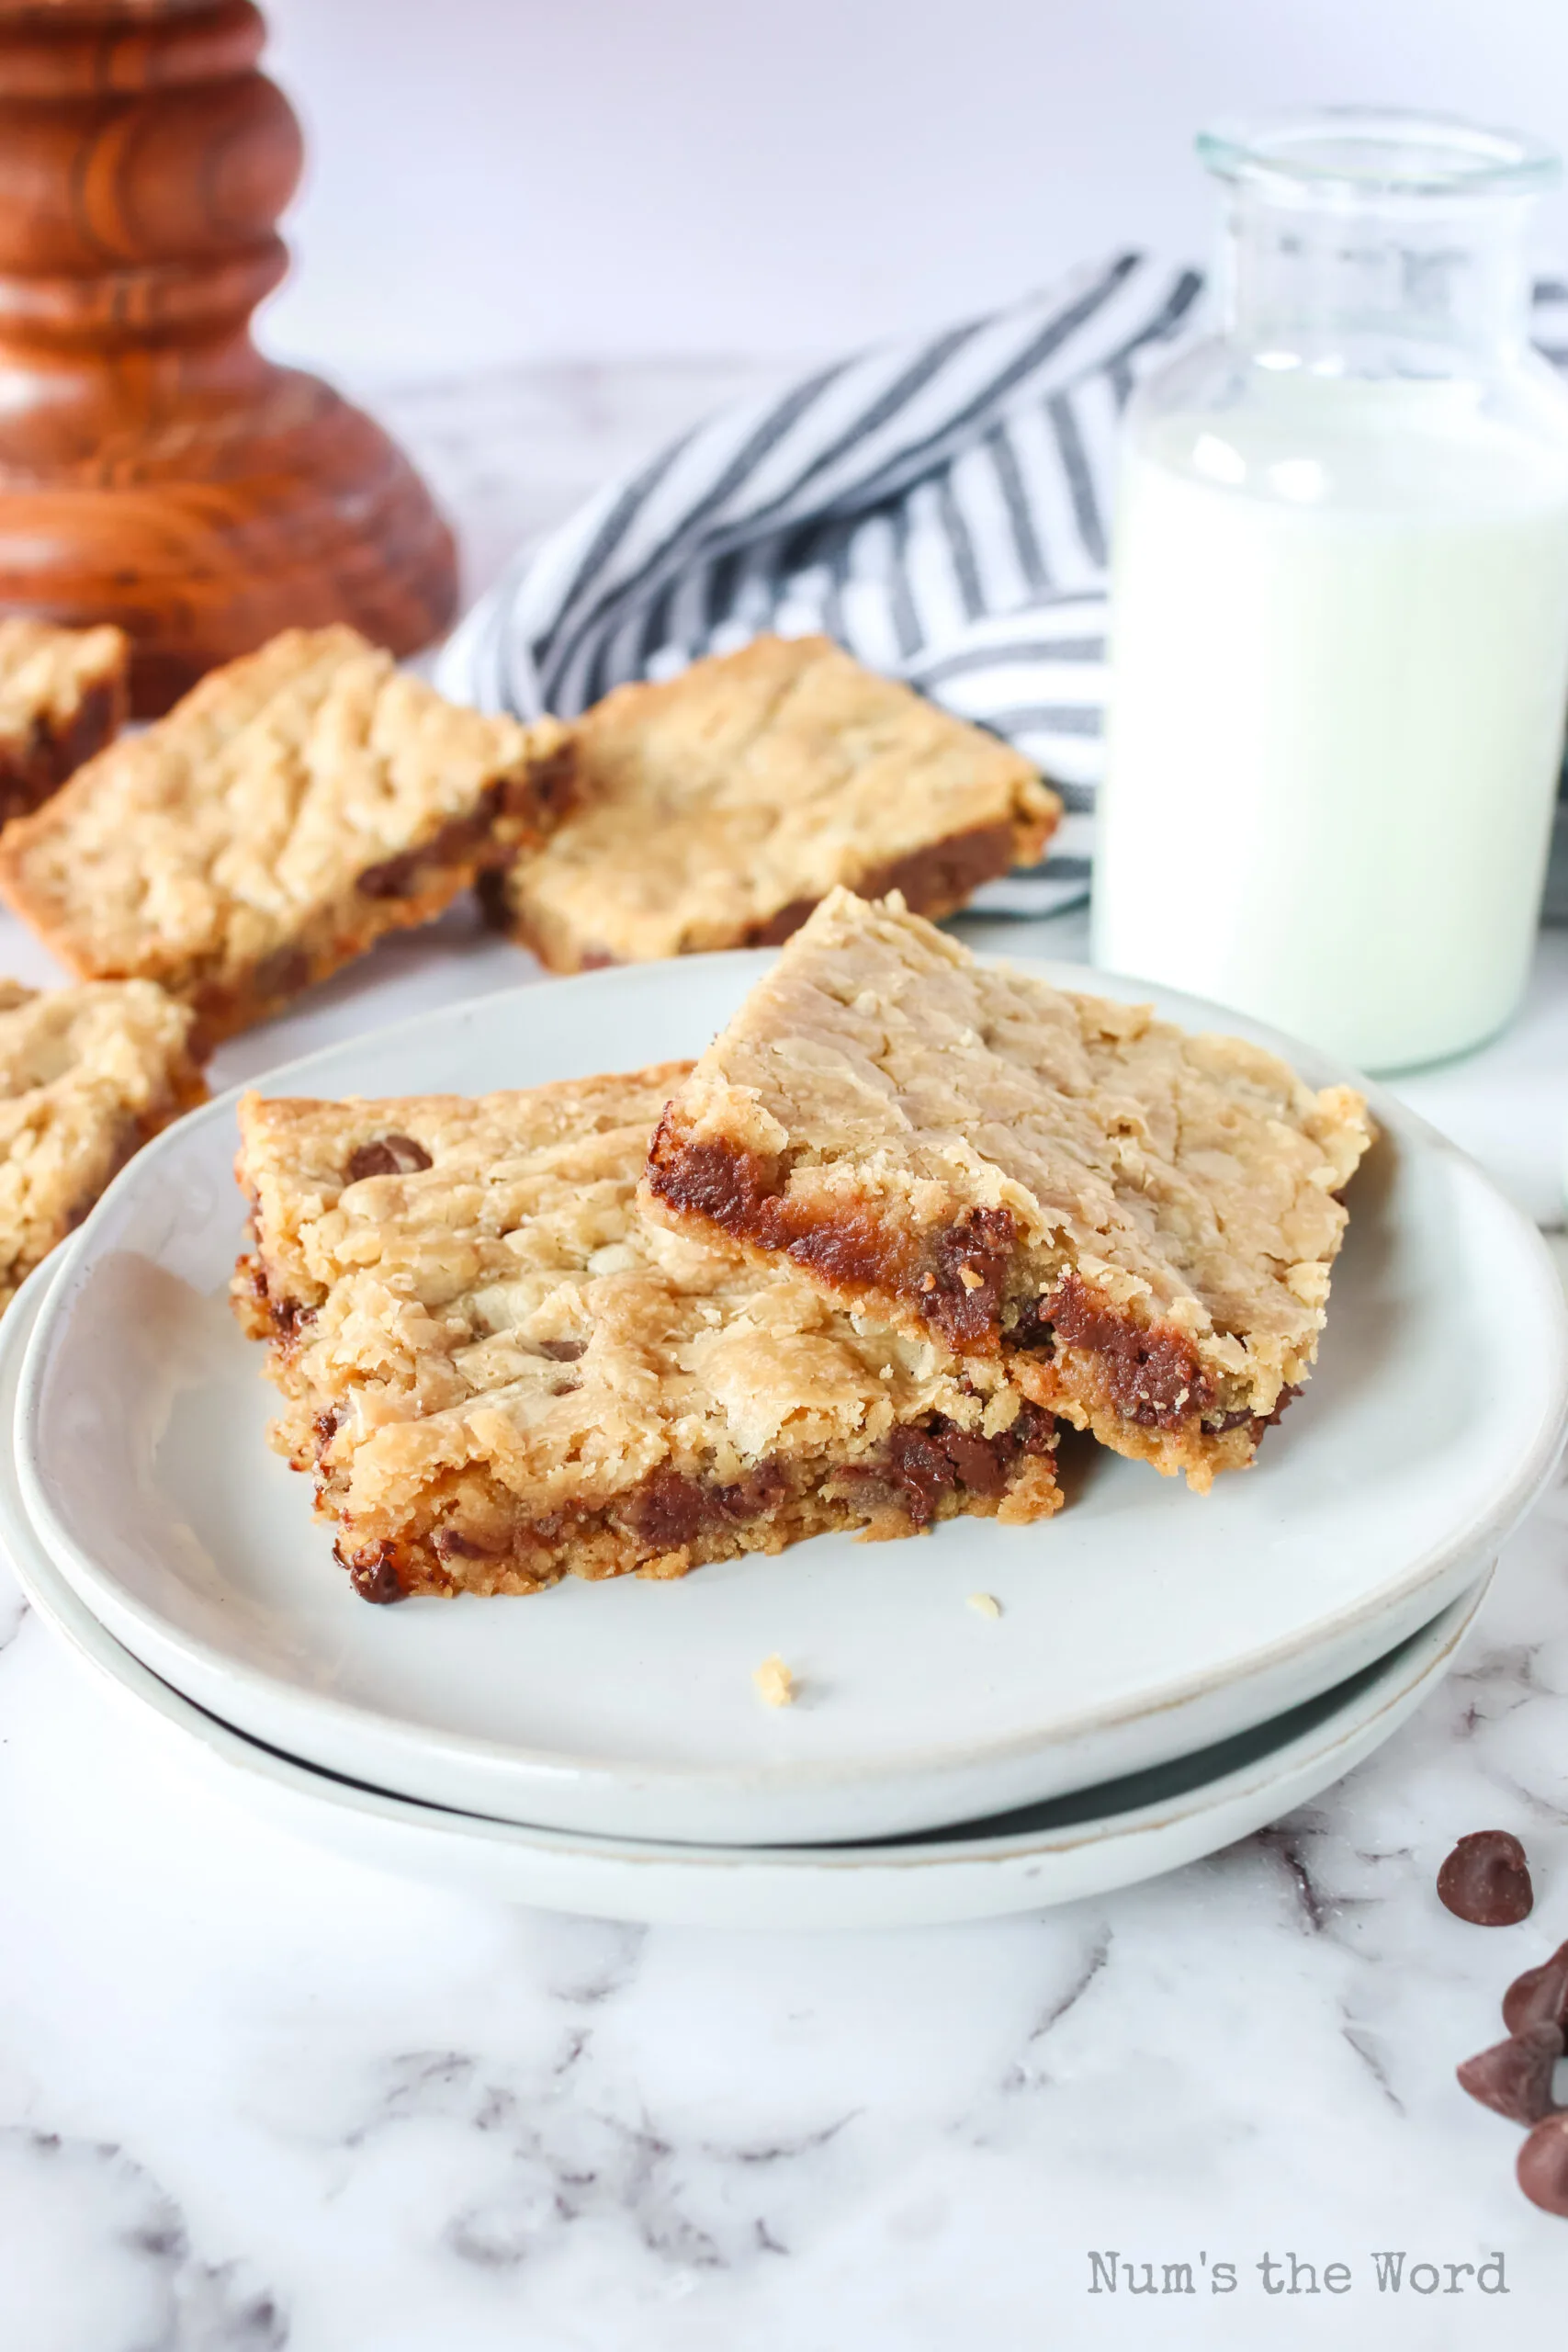 two cookie bars on a plate with a glass of milk and more cookie bars in the background.